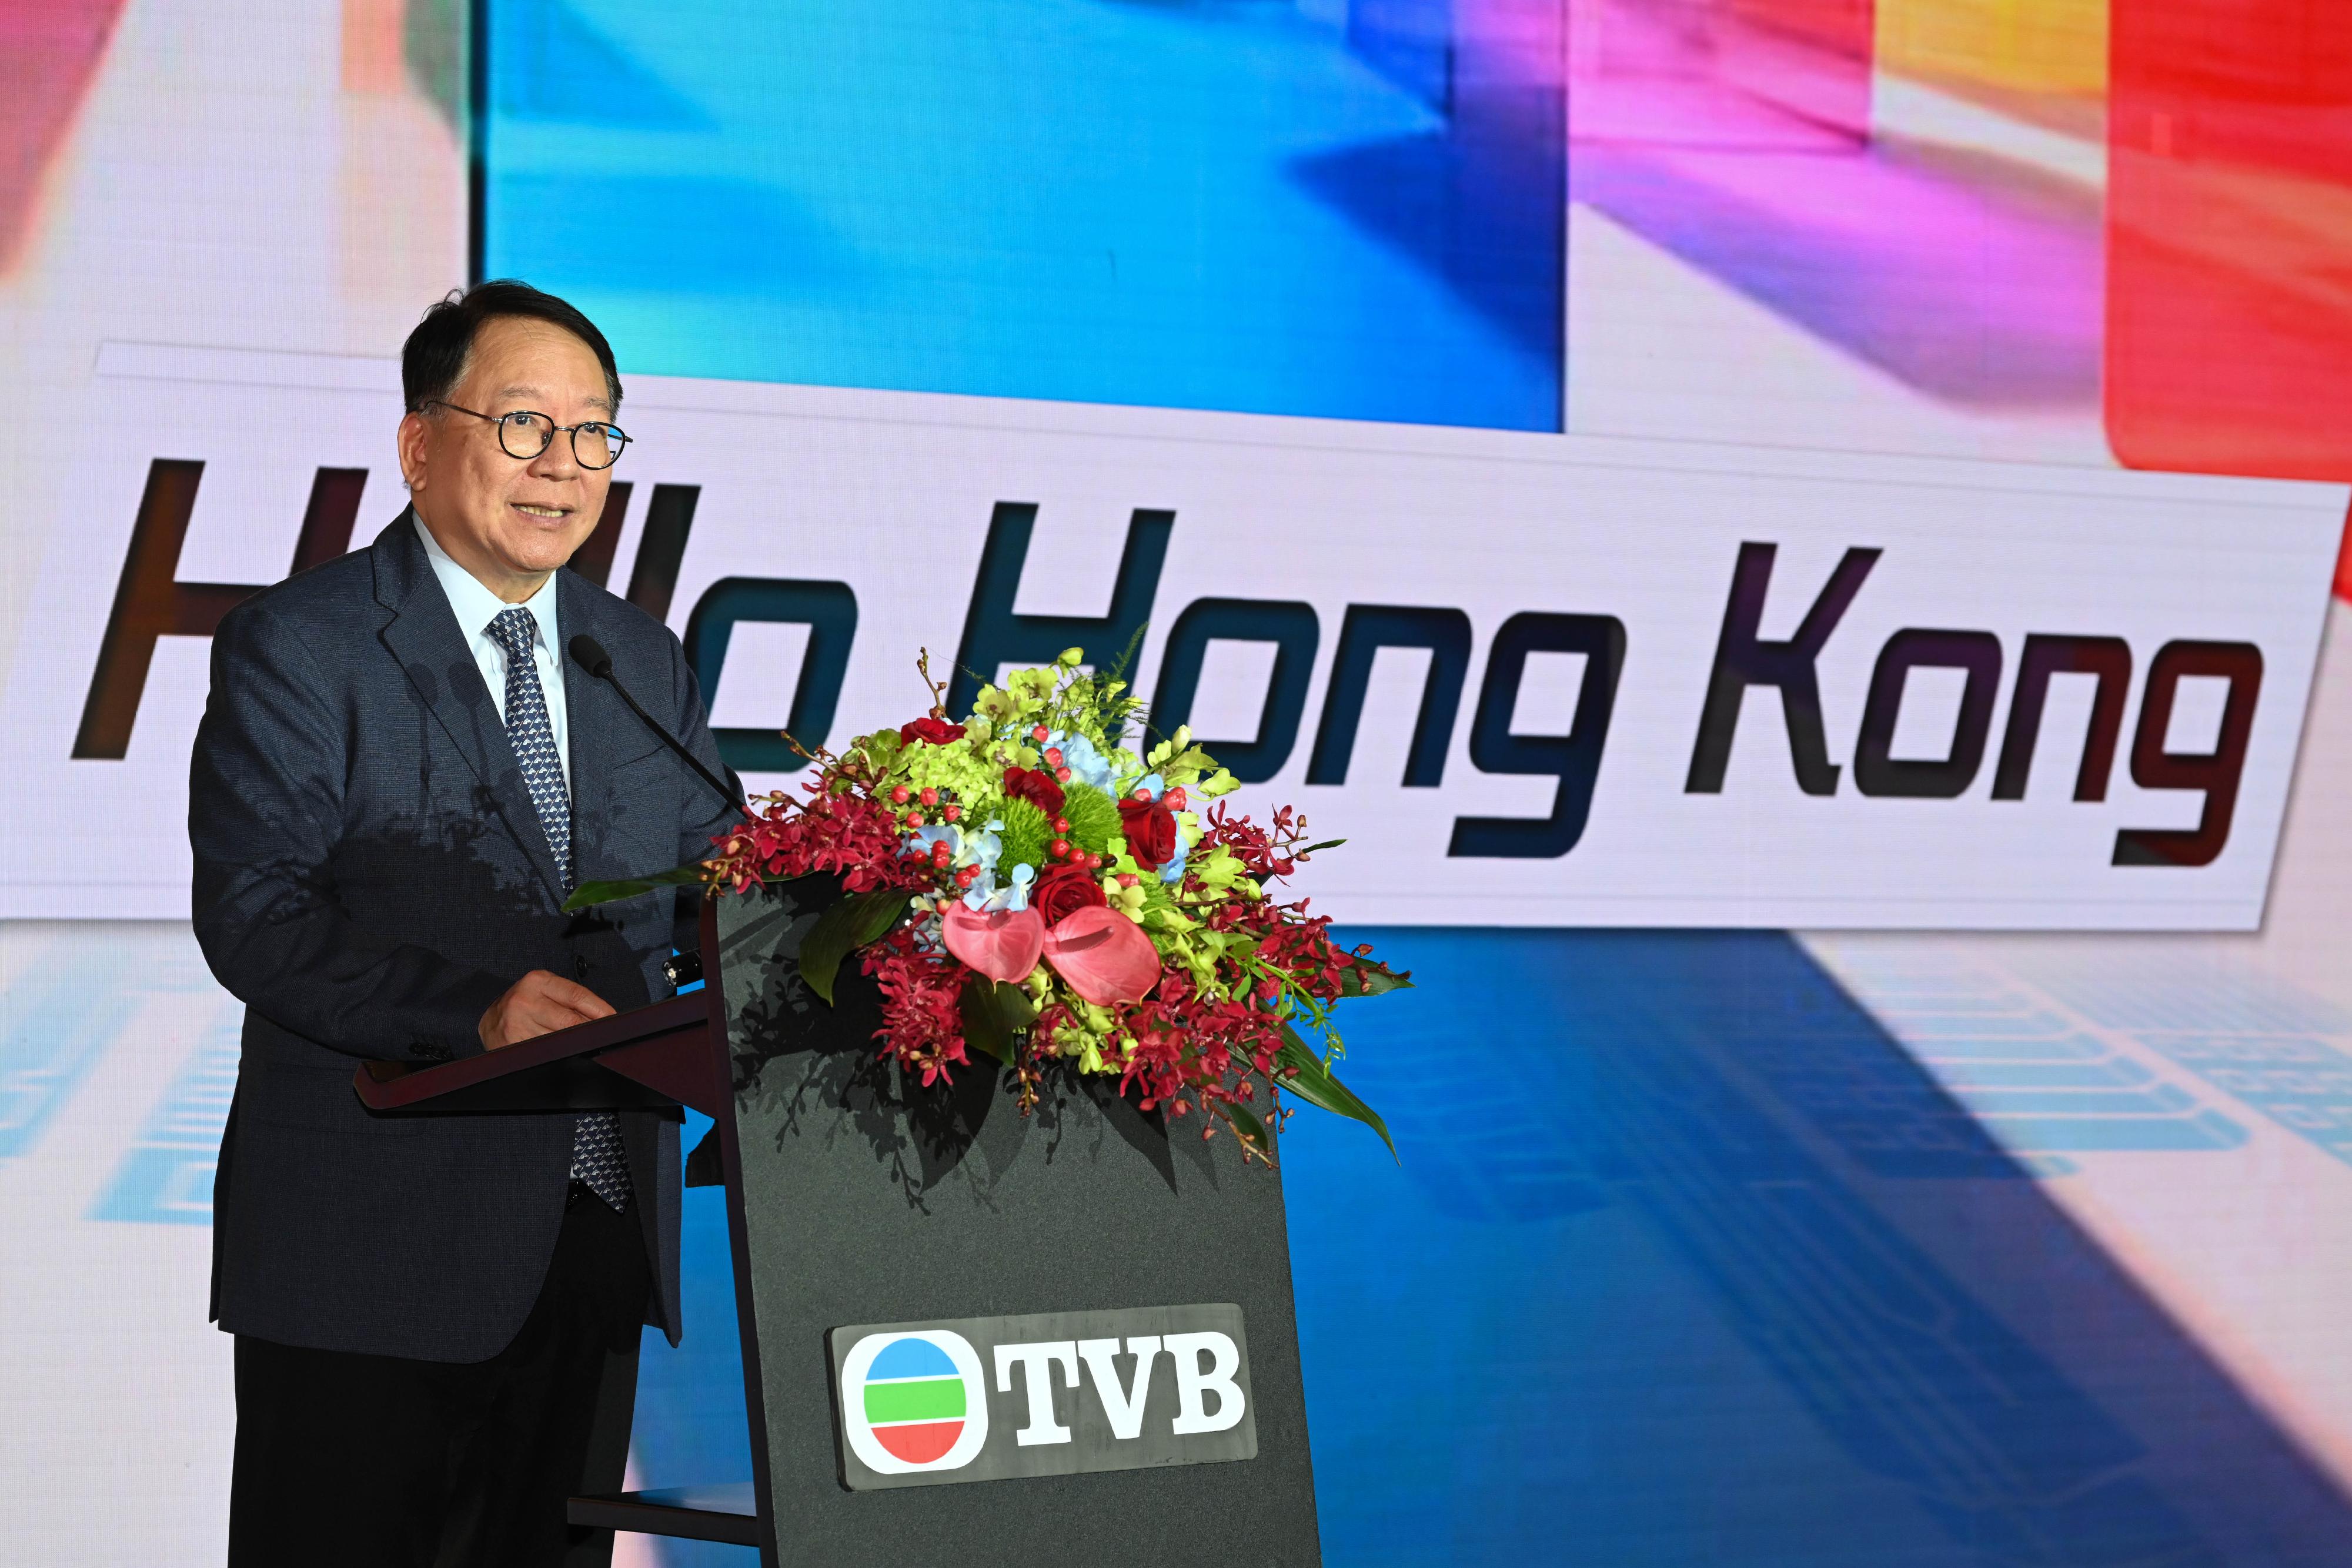 The Chief Secretary for Administration, Mr Chan Kwok-ki, visited Shanghai today (June 25). Photo shows Mr Chan speaking at the Hello Hong Kong event organised by Television Broadcast Limited.